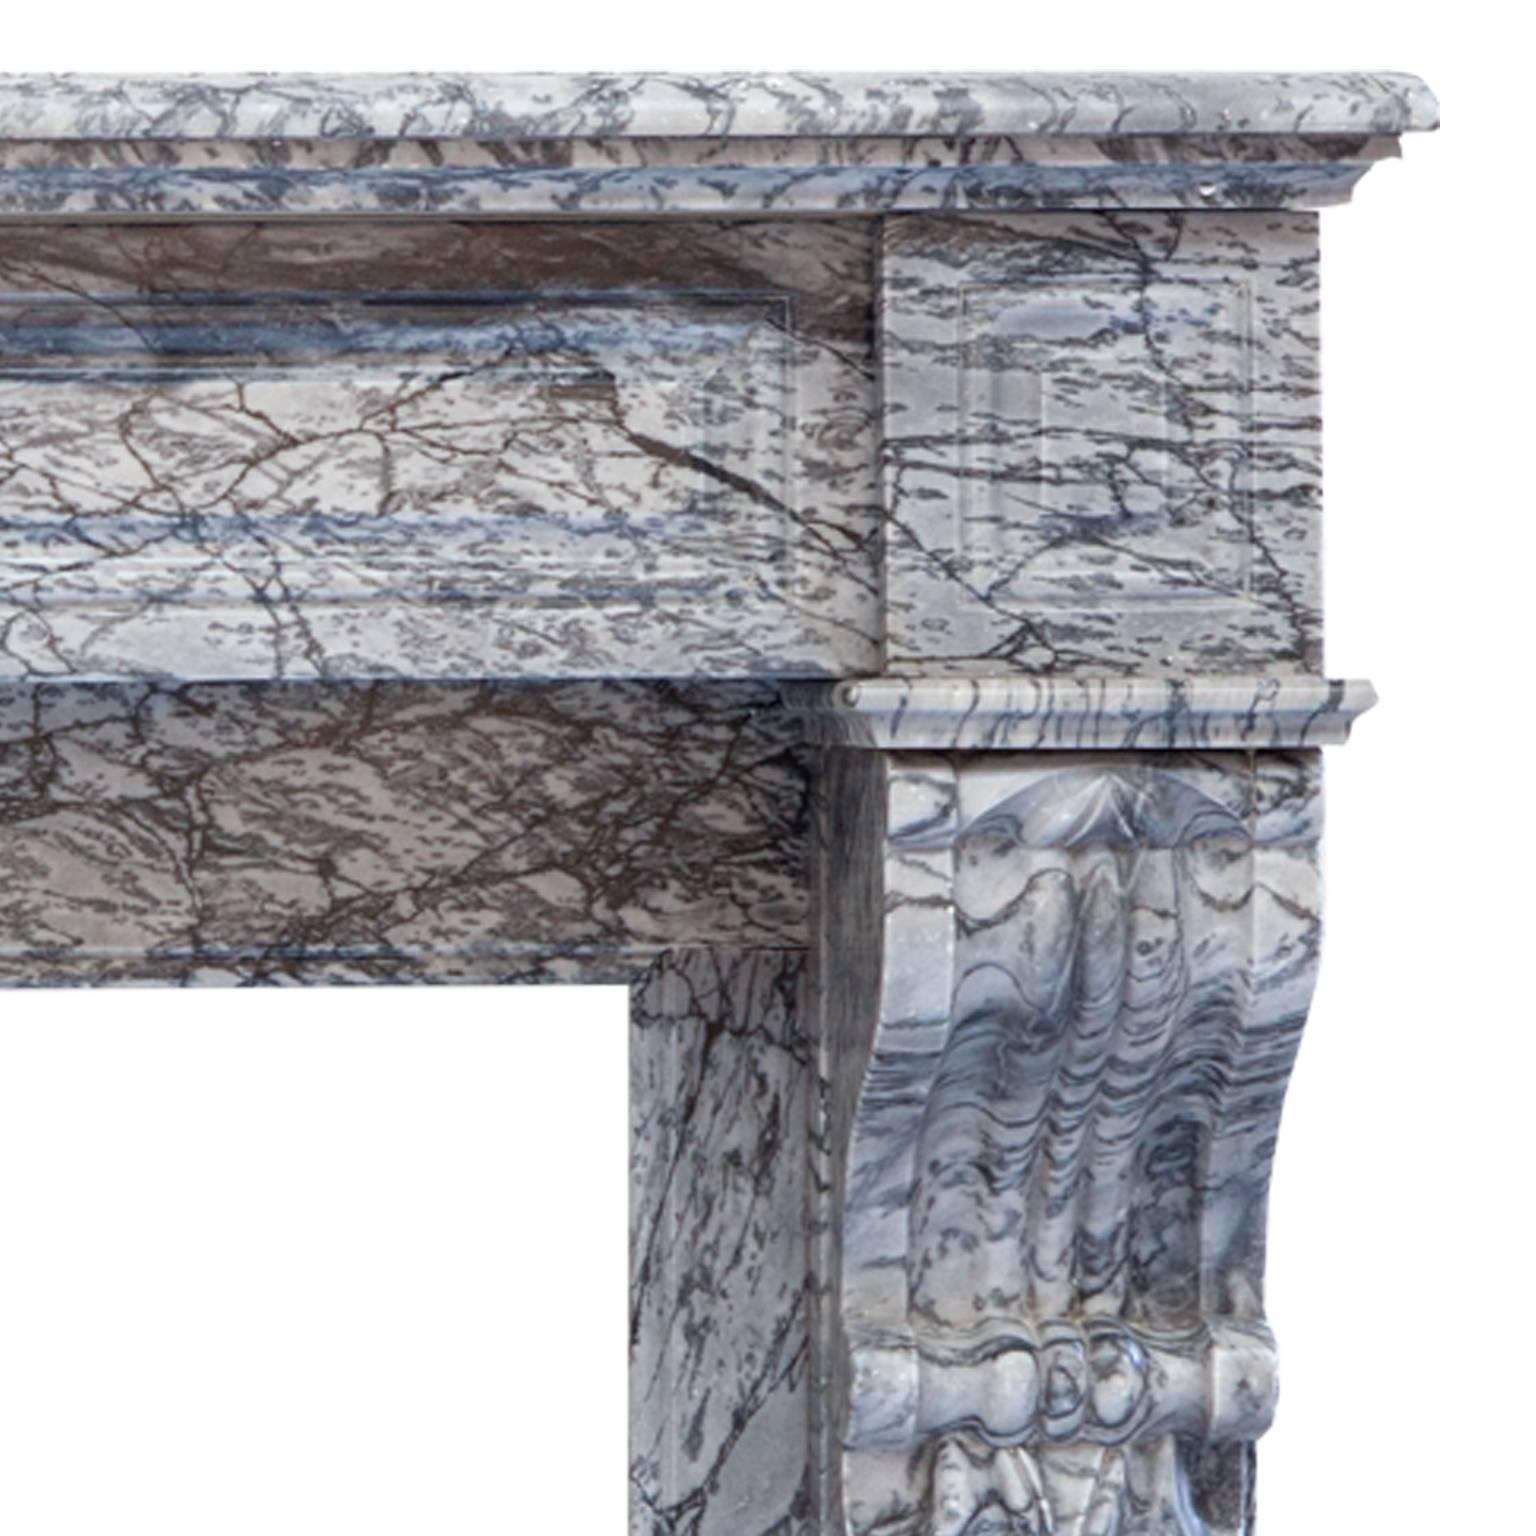 Unique Rare 19th Century Antique French Louis Phillipe Fireplace Mantel. Hand Carved in Desirable Blue Feuri Marble Which Is From Seravezza Near The Carrara Re´gion In Italy. It’s A Grey-Blue Crystalline Marble With Deep veins. Hand Carved Recessed